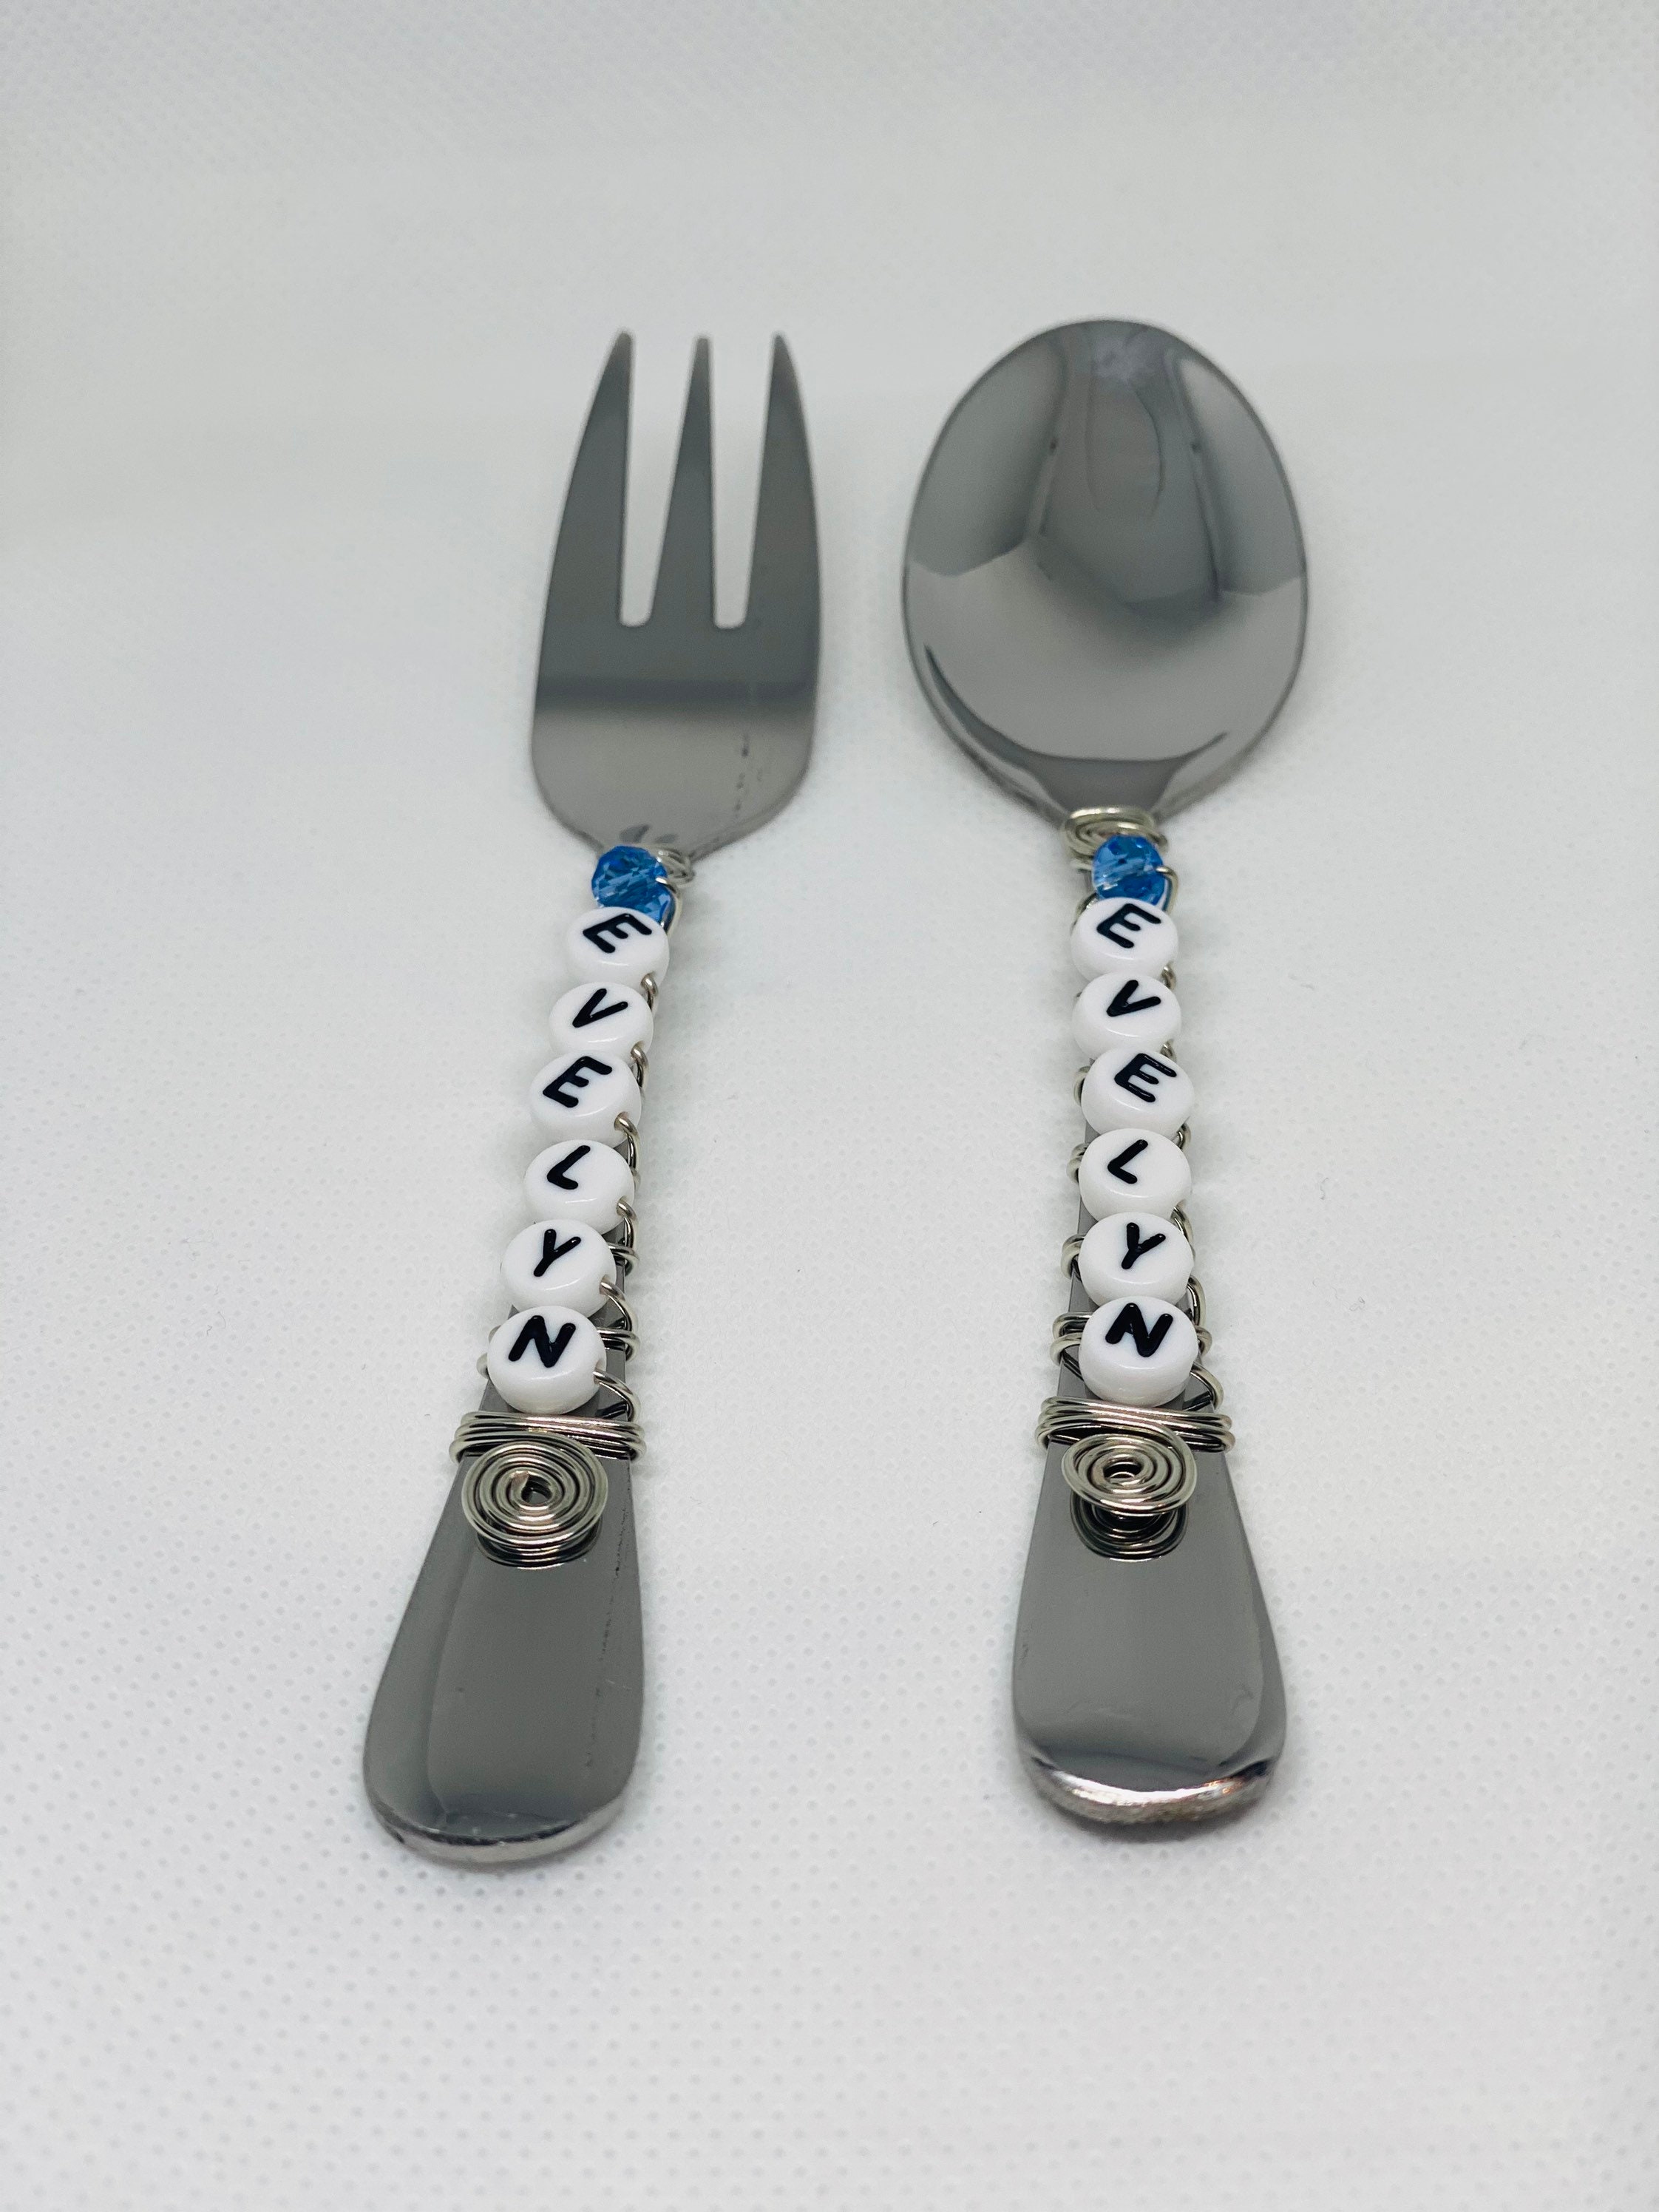 Personalized Lunch Box Silverware 2 Piece Set Beaded Stainless Steel  Cutlery/silverware 1 X Fork, 1 X Spoon up to 8 Letters 